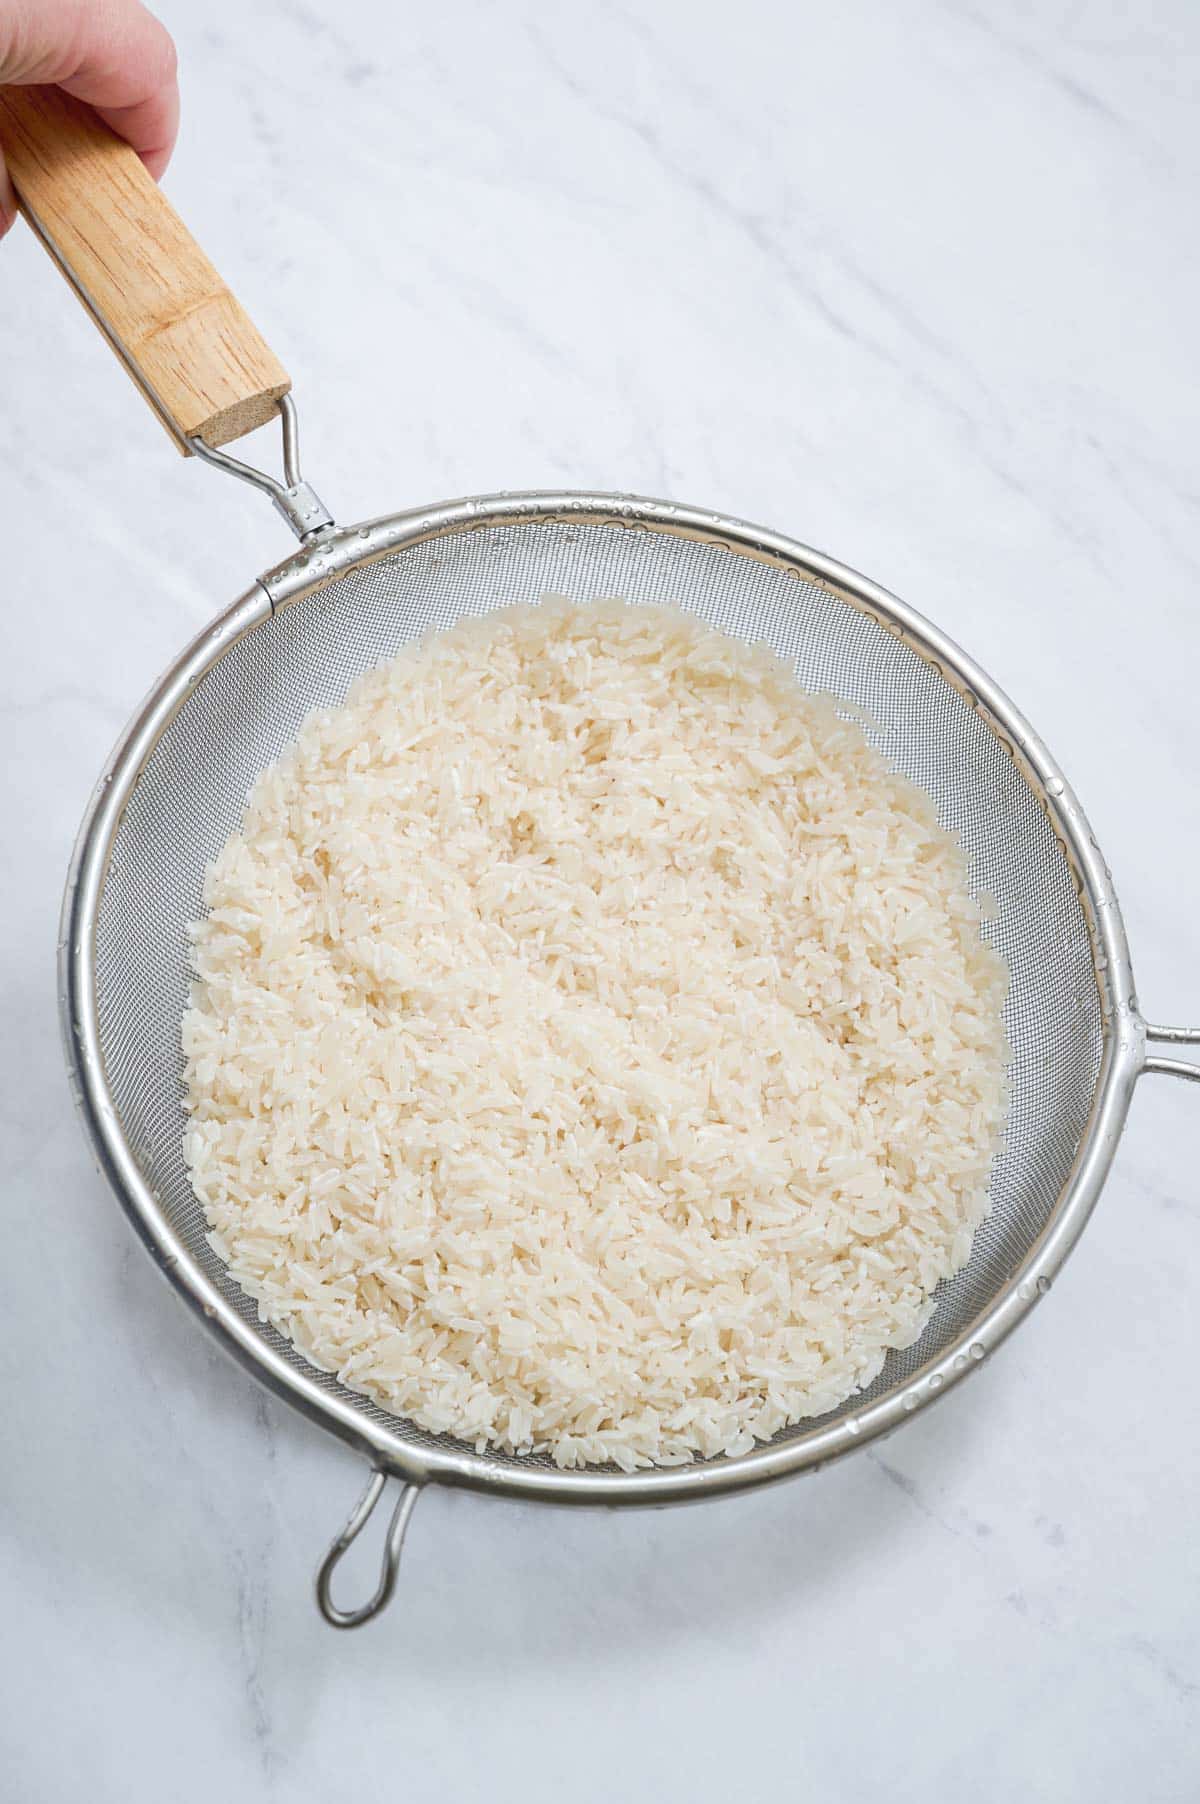 Rice is rinsed in a strainer.